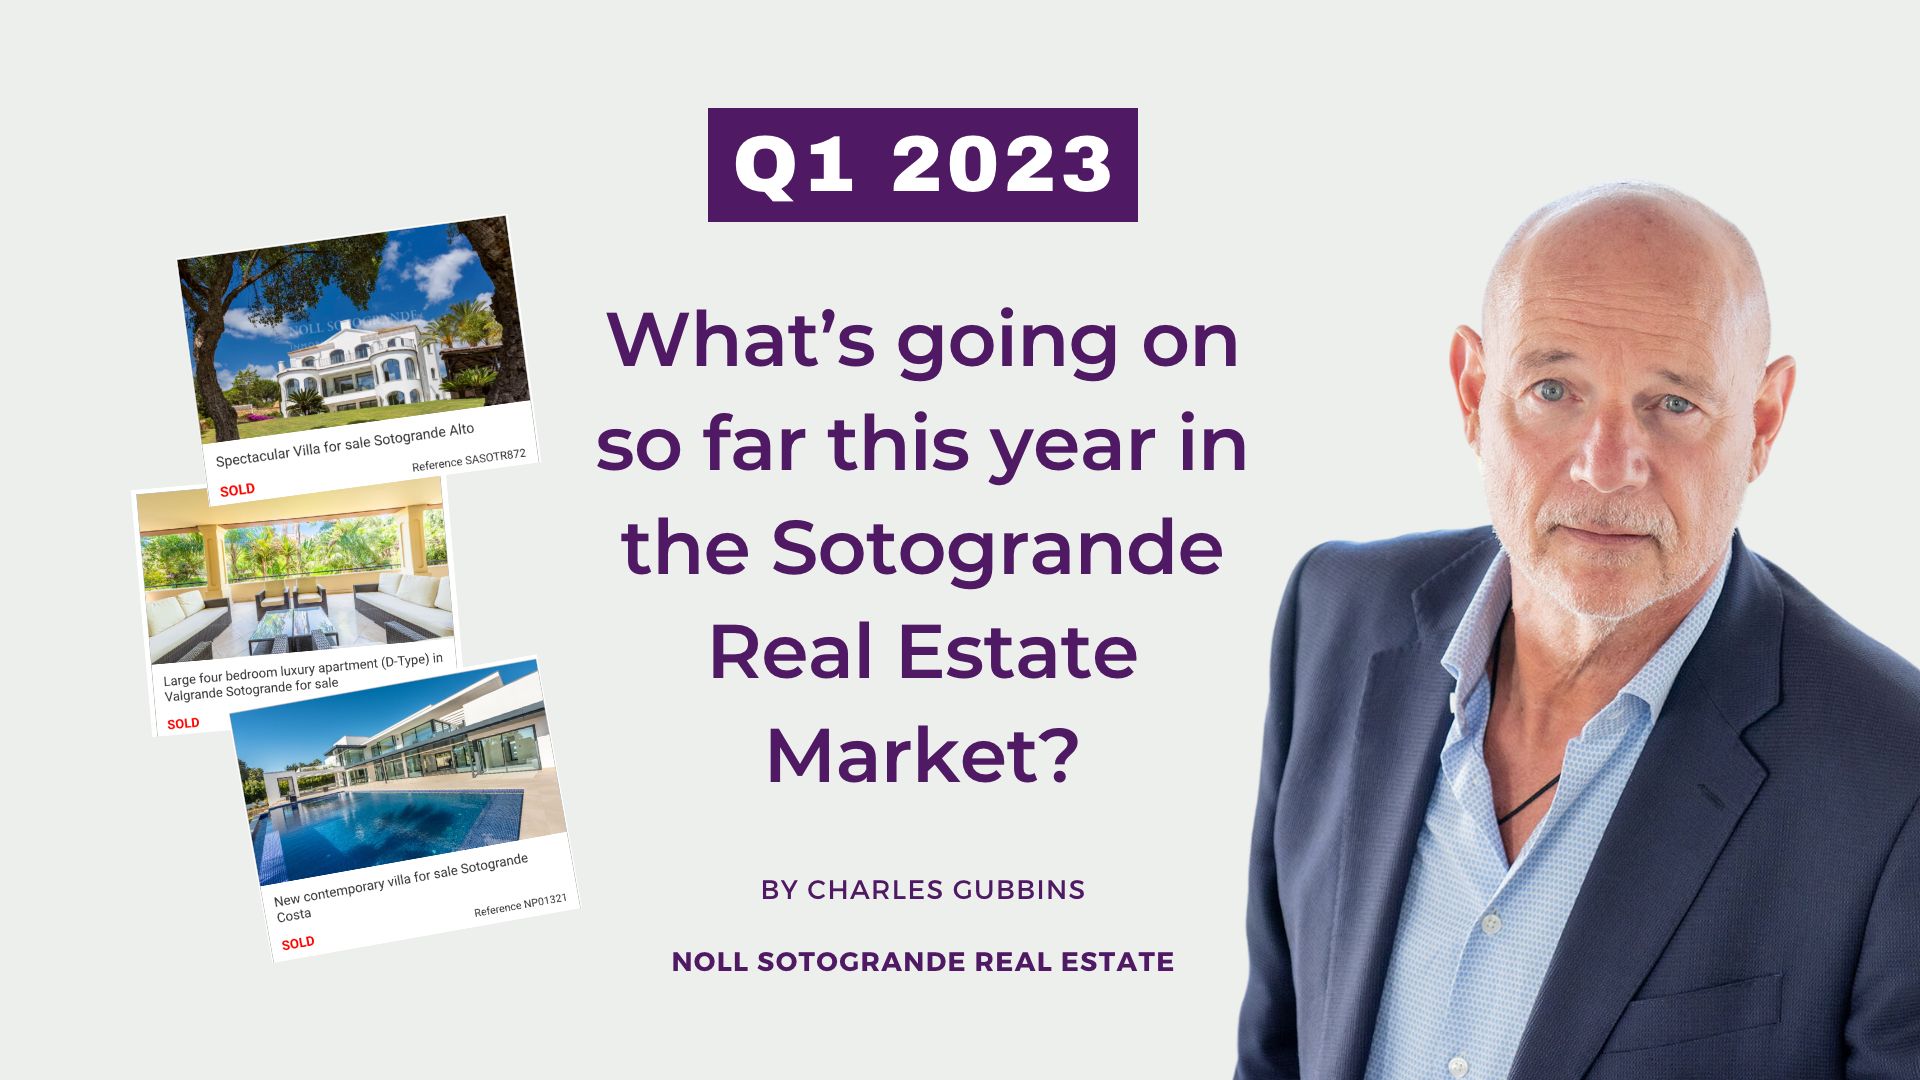 What’s going on so far this year in the Sotogrande Real Estate market - © Charles Gubbins Noll Sotogrande 2023